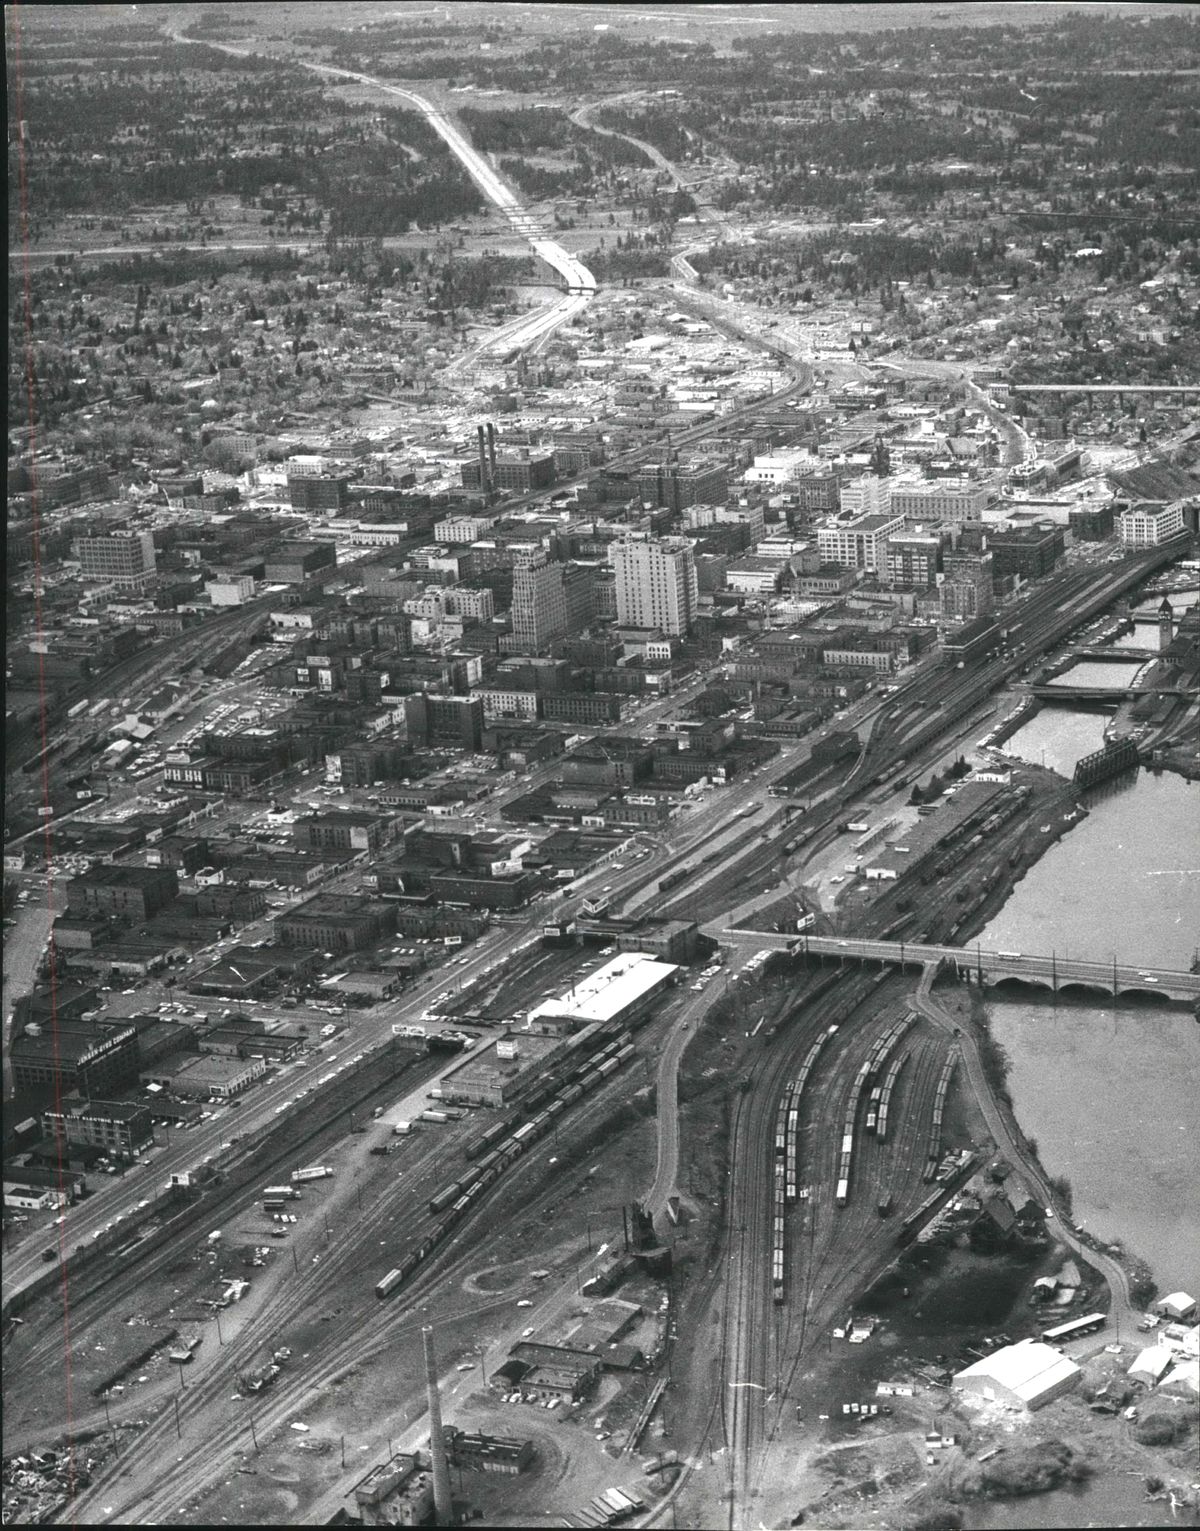 In the foreground of this 1966 photograph are the railroad tracks serving Spokane’s downtown passenger and freight depots along the Spokane River waterfront. The tracks carried frieght and passengers for the Great Northern, the Milwaukee Road, Union Pacific, the Spokane Portland and Seattle and many other lines before all were removed for Expo ’74 and the creation of Riverfront Park. (SR)